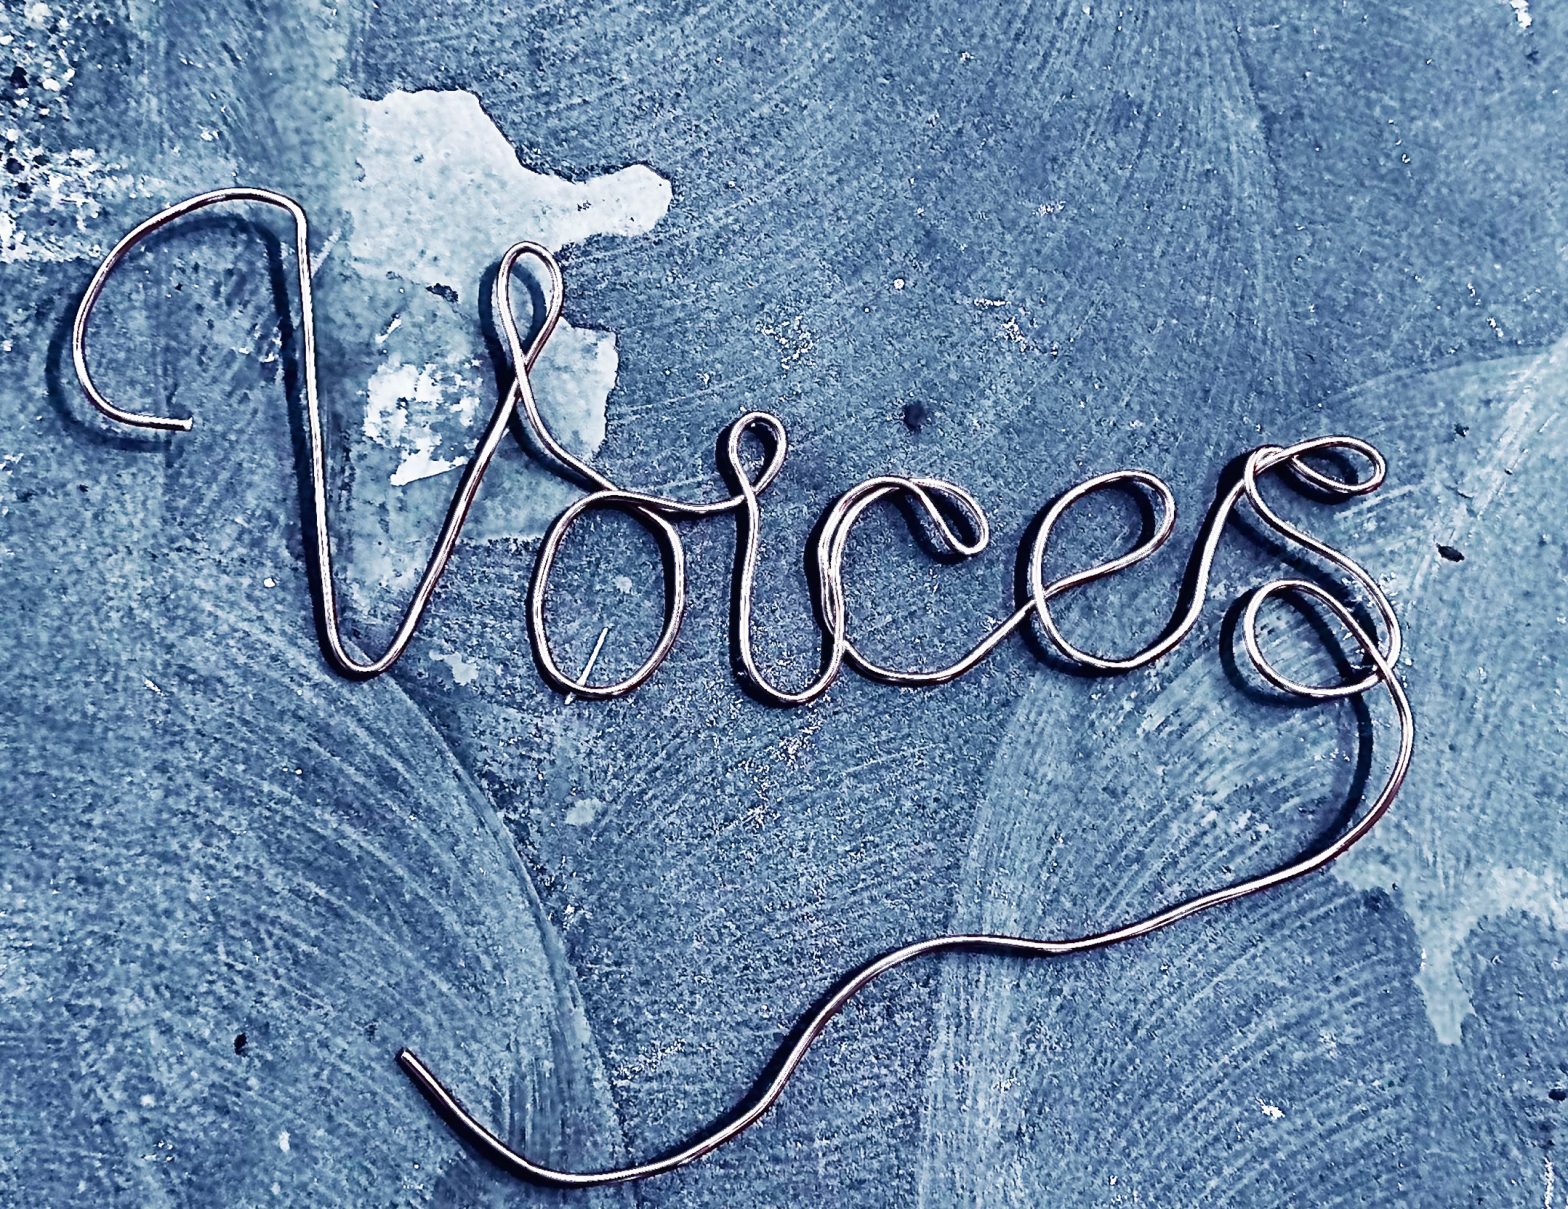 The word Voices made from wire against a floor or surface with patches of brushwork and watermarks.